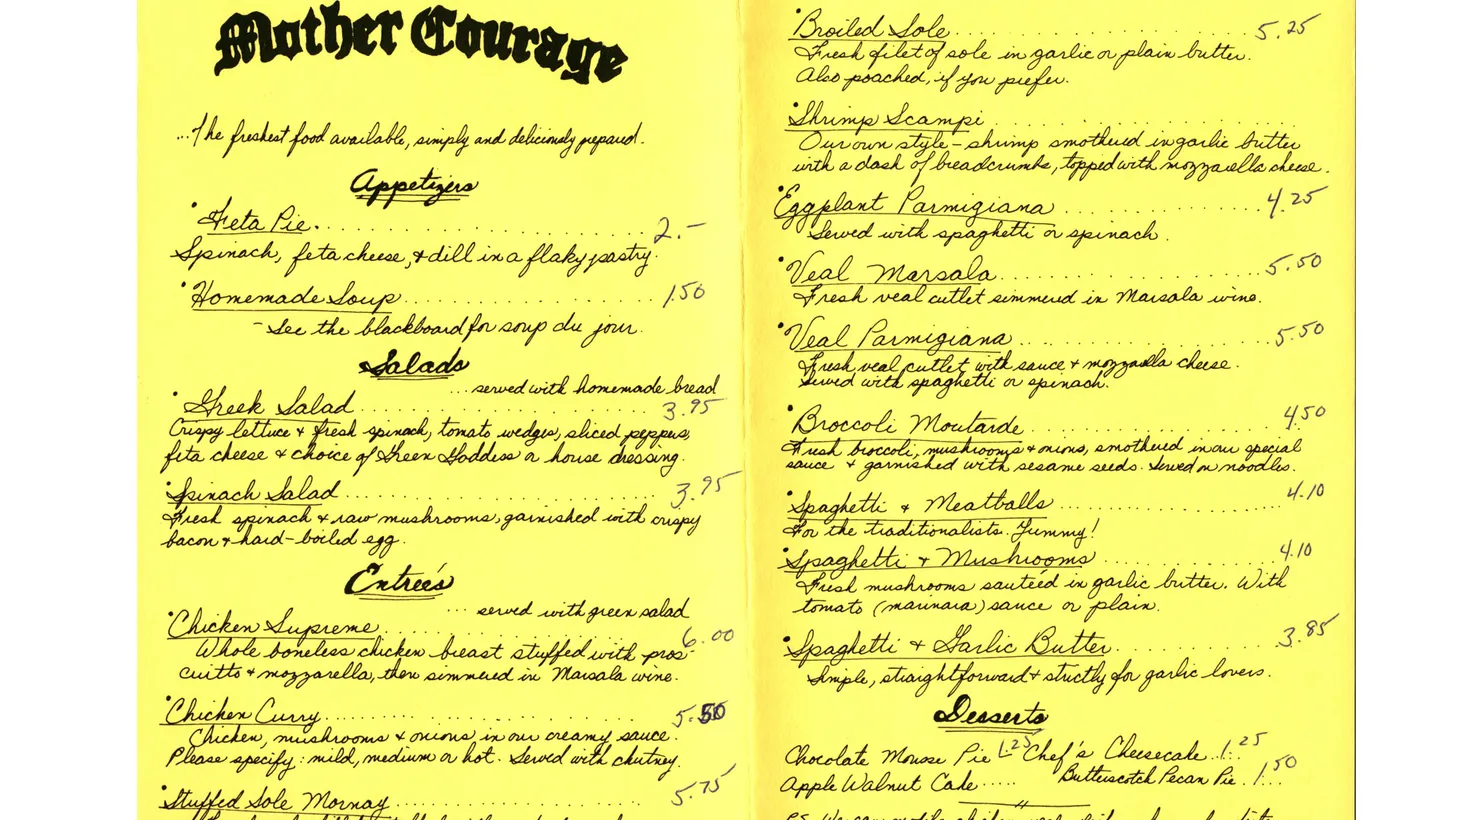 Although many feminist restaurants were vegetarian, Mother Courage, named after the Bertolt Brecht play, included several meat dishes on its menu.